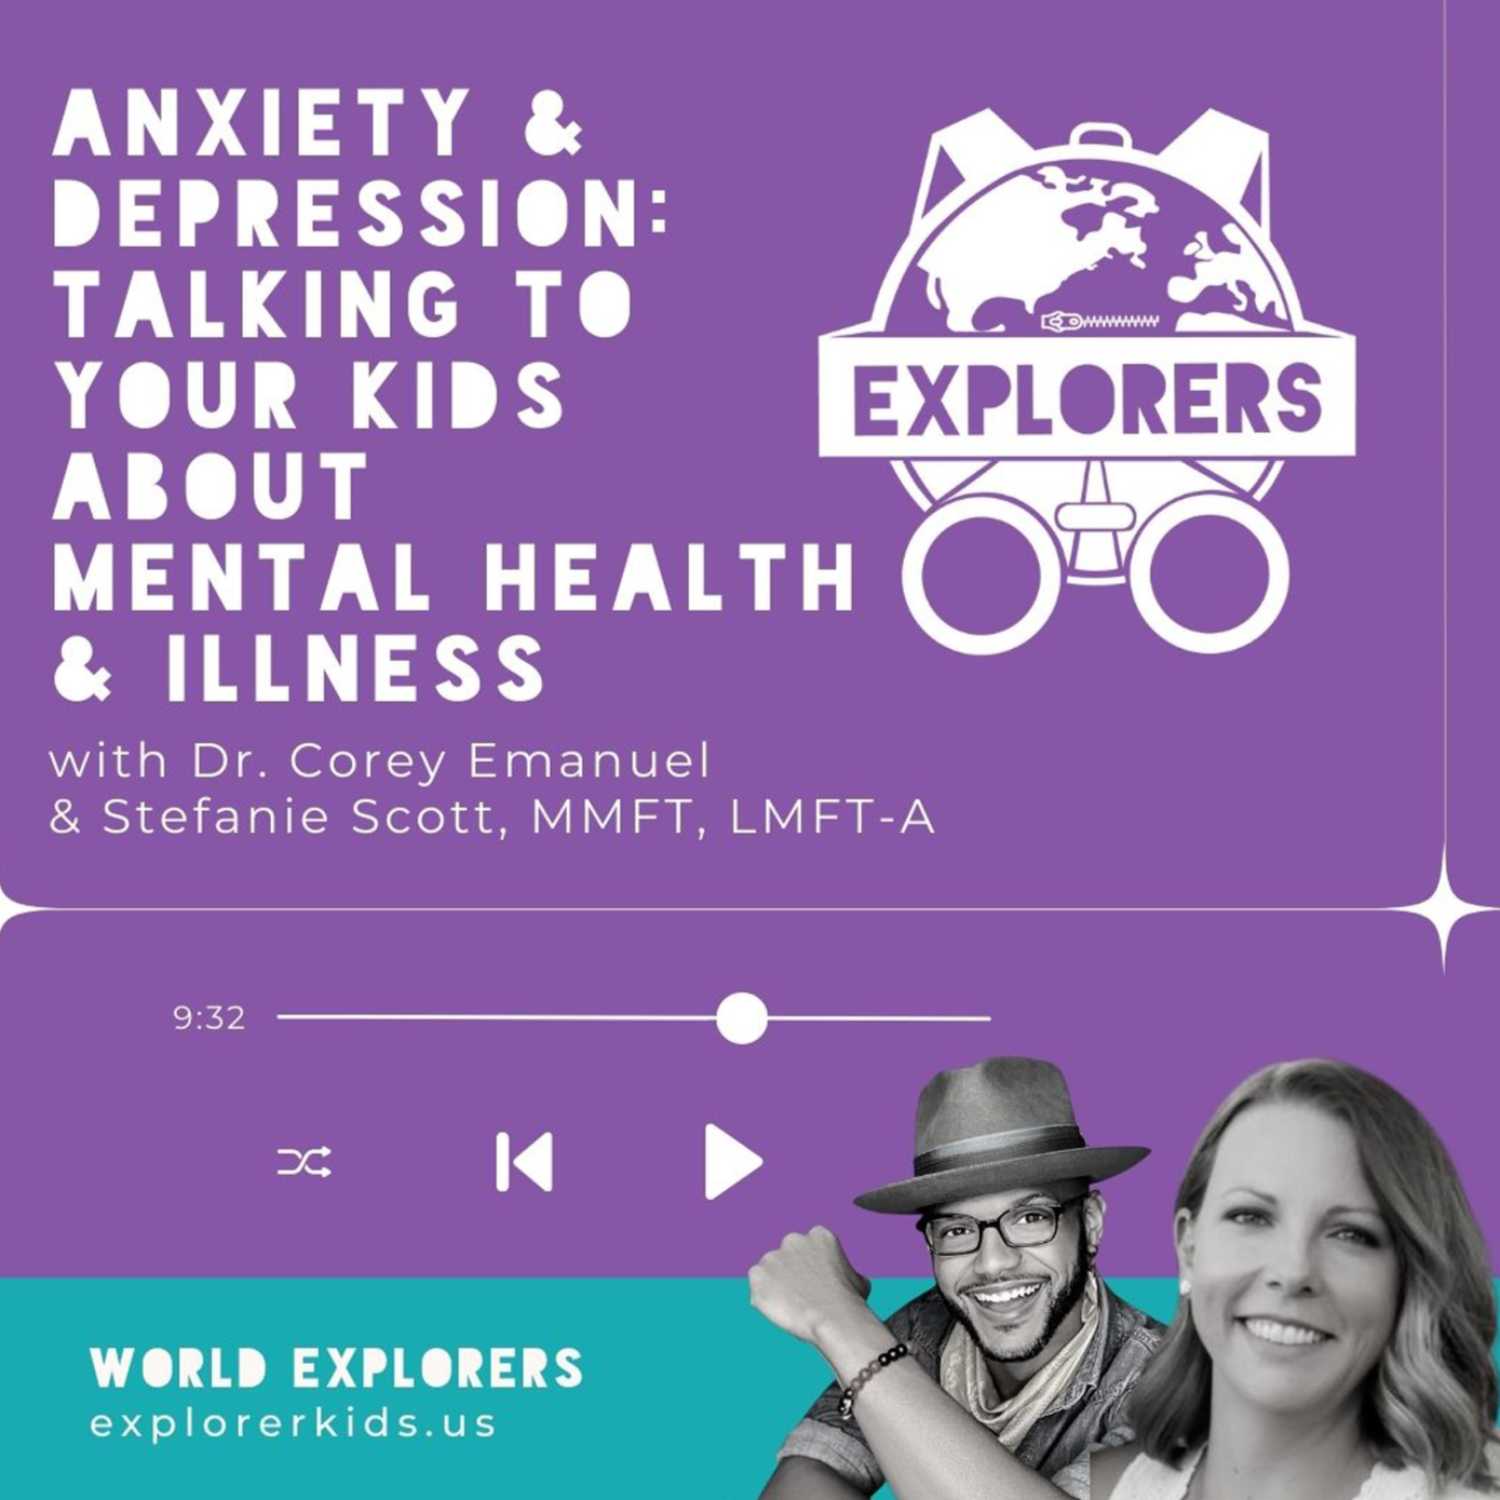 Anxiety & Depression: Talking to Your Kids about Mental Health & Illness